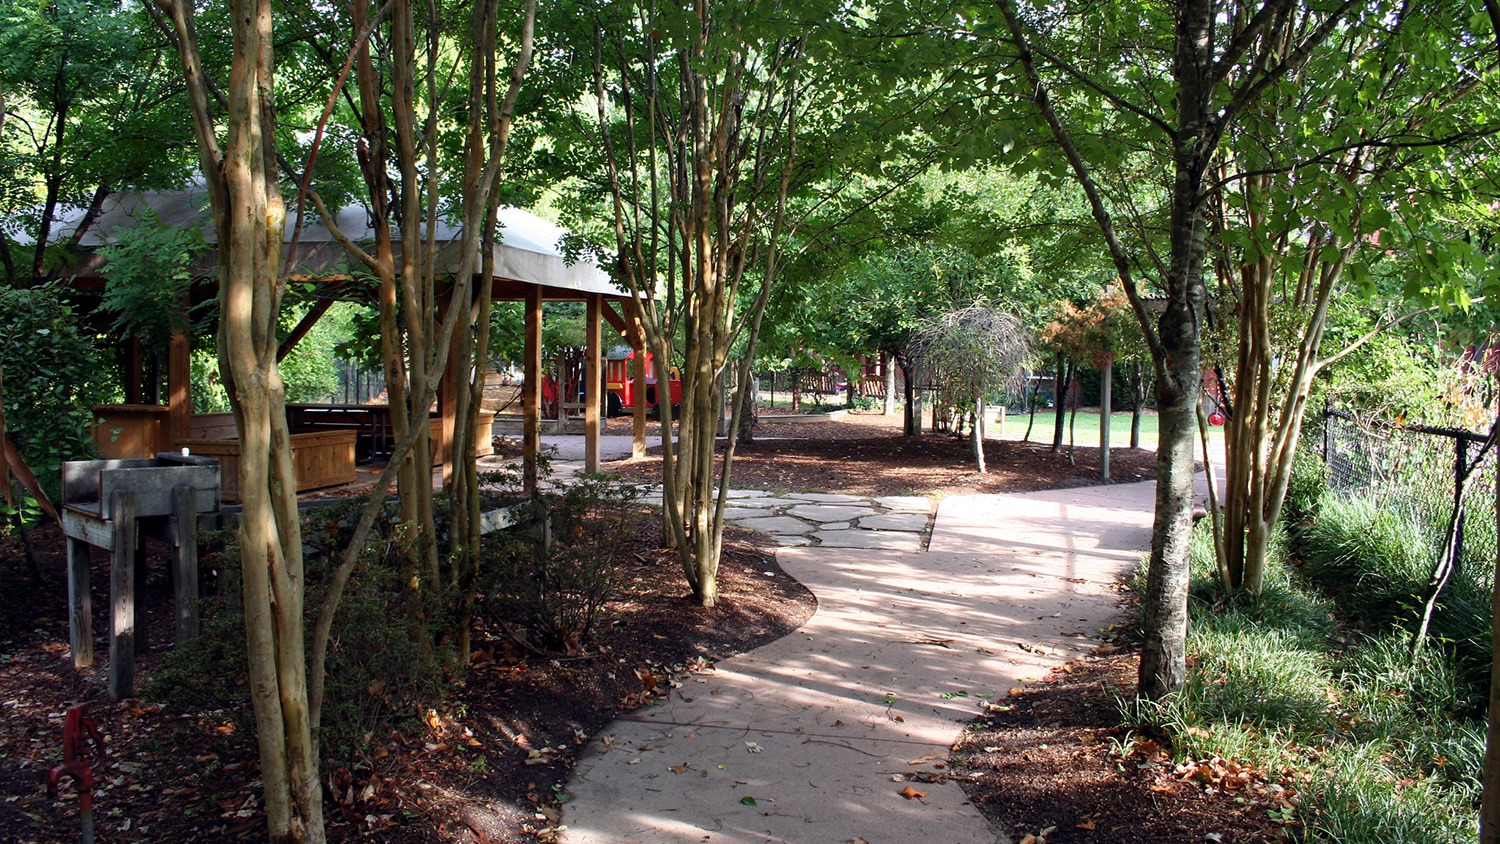 Outdoor play area with path winding through trees at child development center.